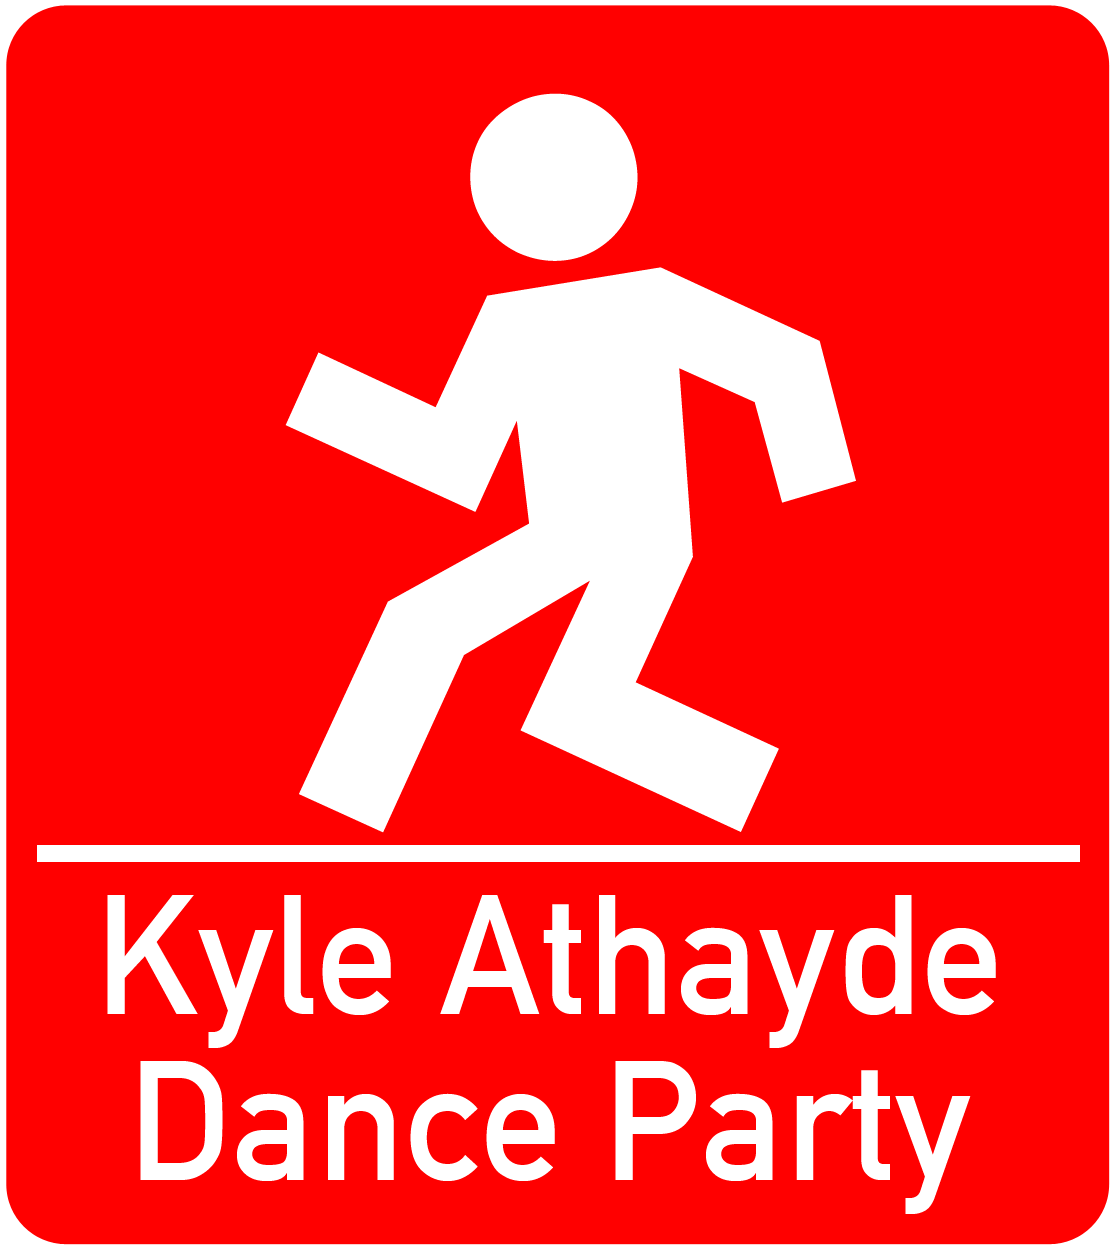 The Kyle Athayde Dance Party